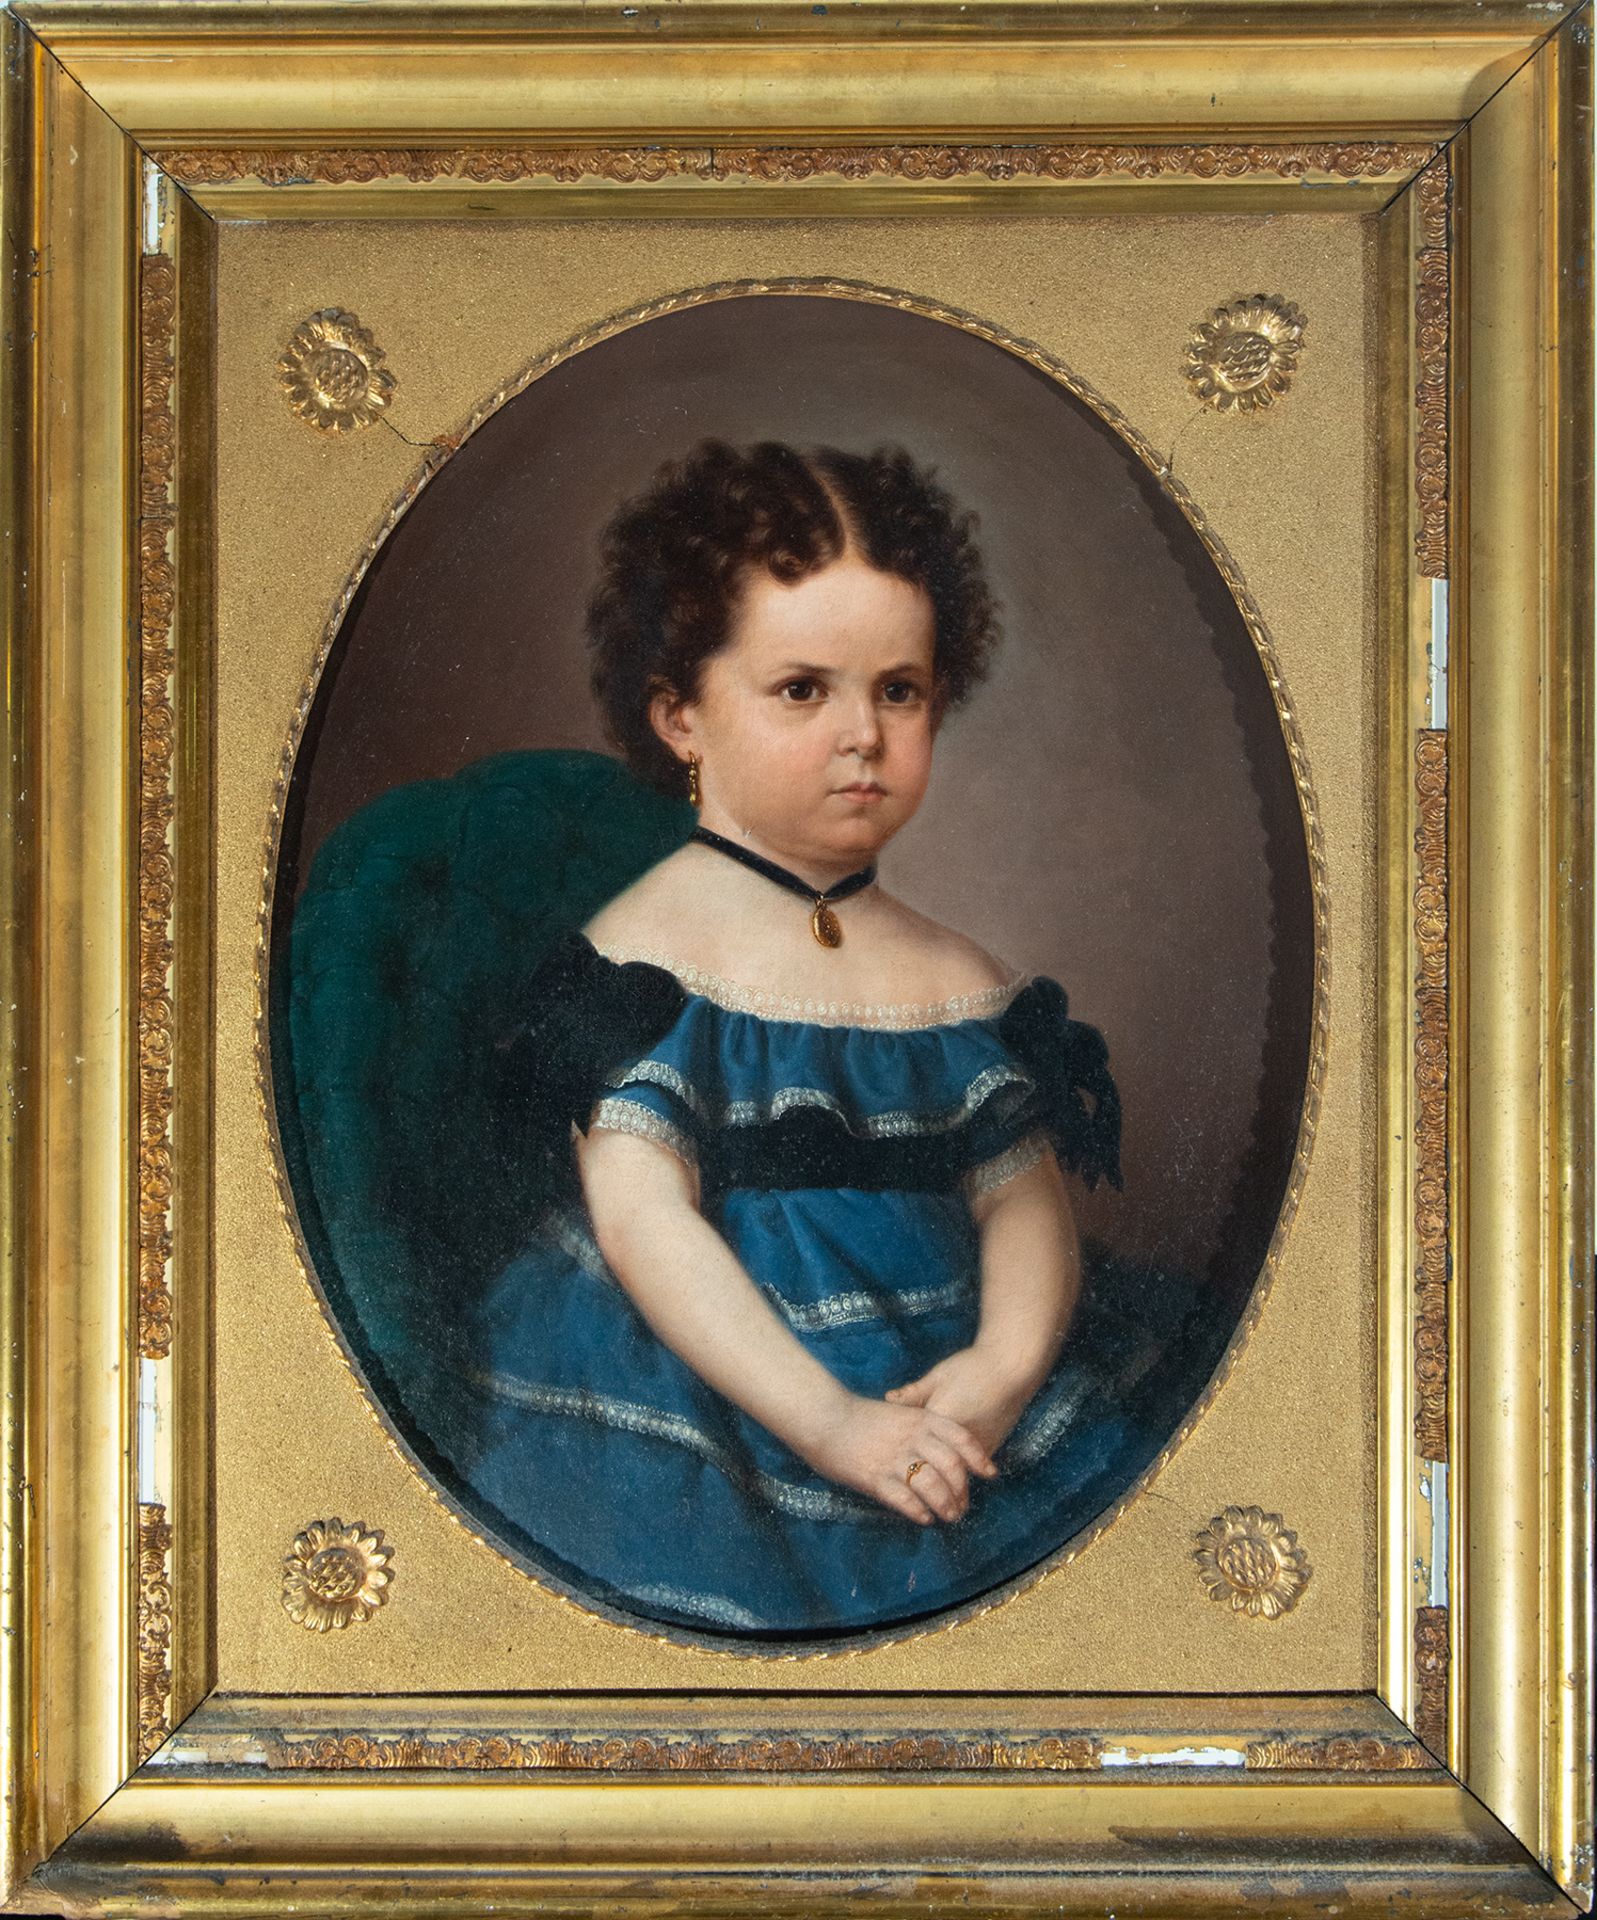 Portrait of a Girl in Oval, 19th century Spanish school